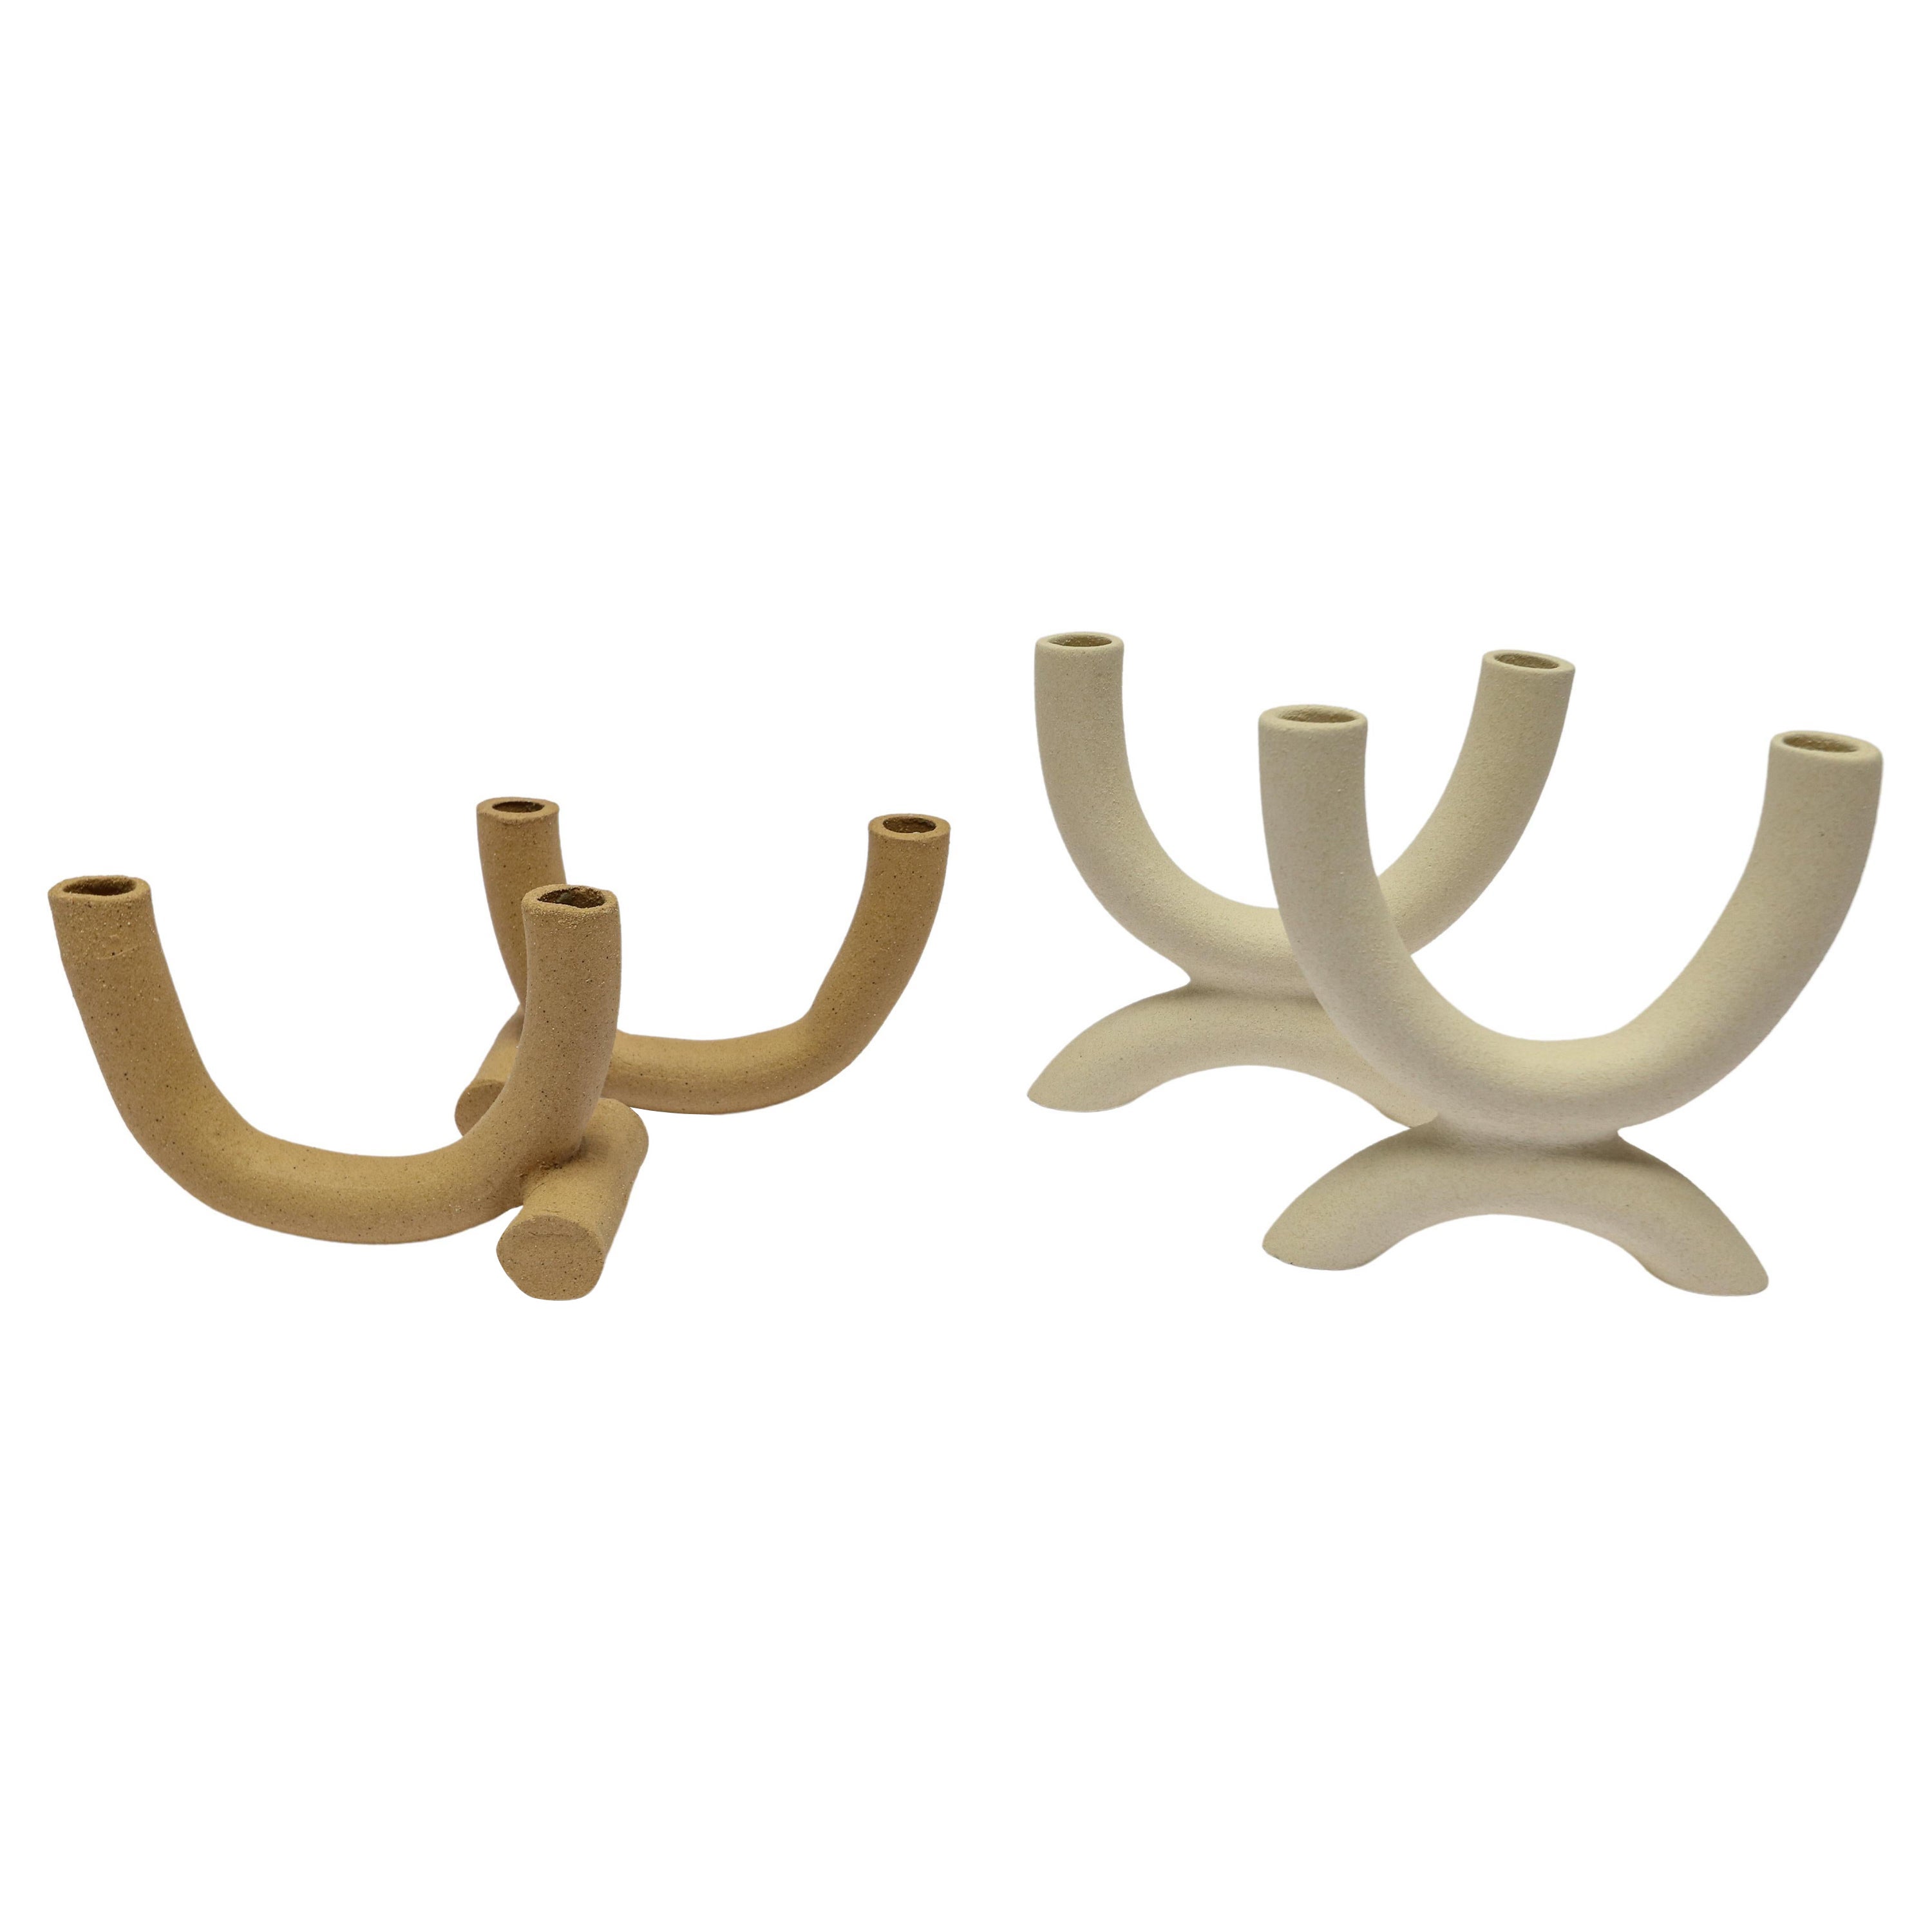 Forevermore & Harmony Duel Candle Holders in Blanc White & Birch Tan For Sale